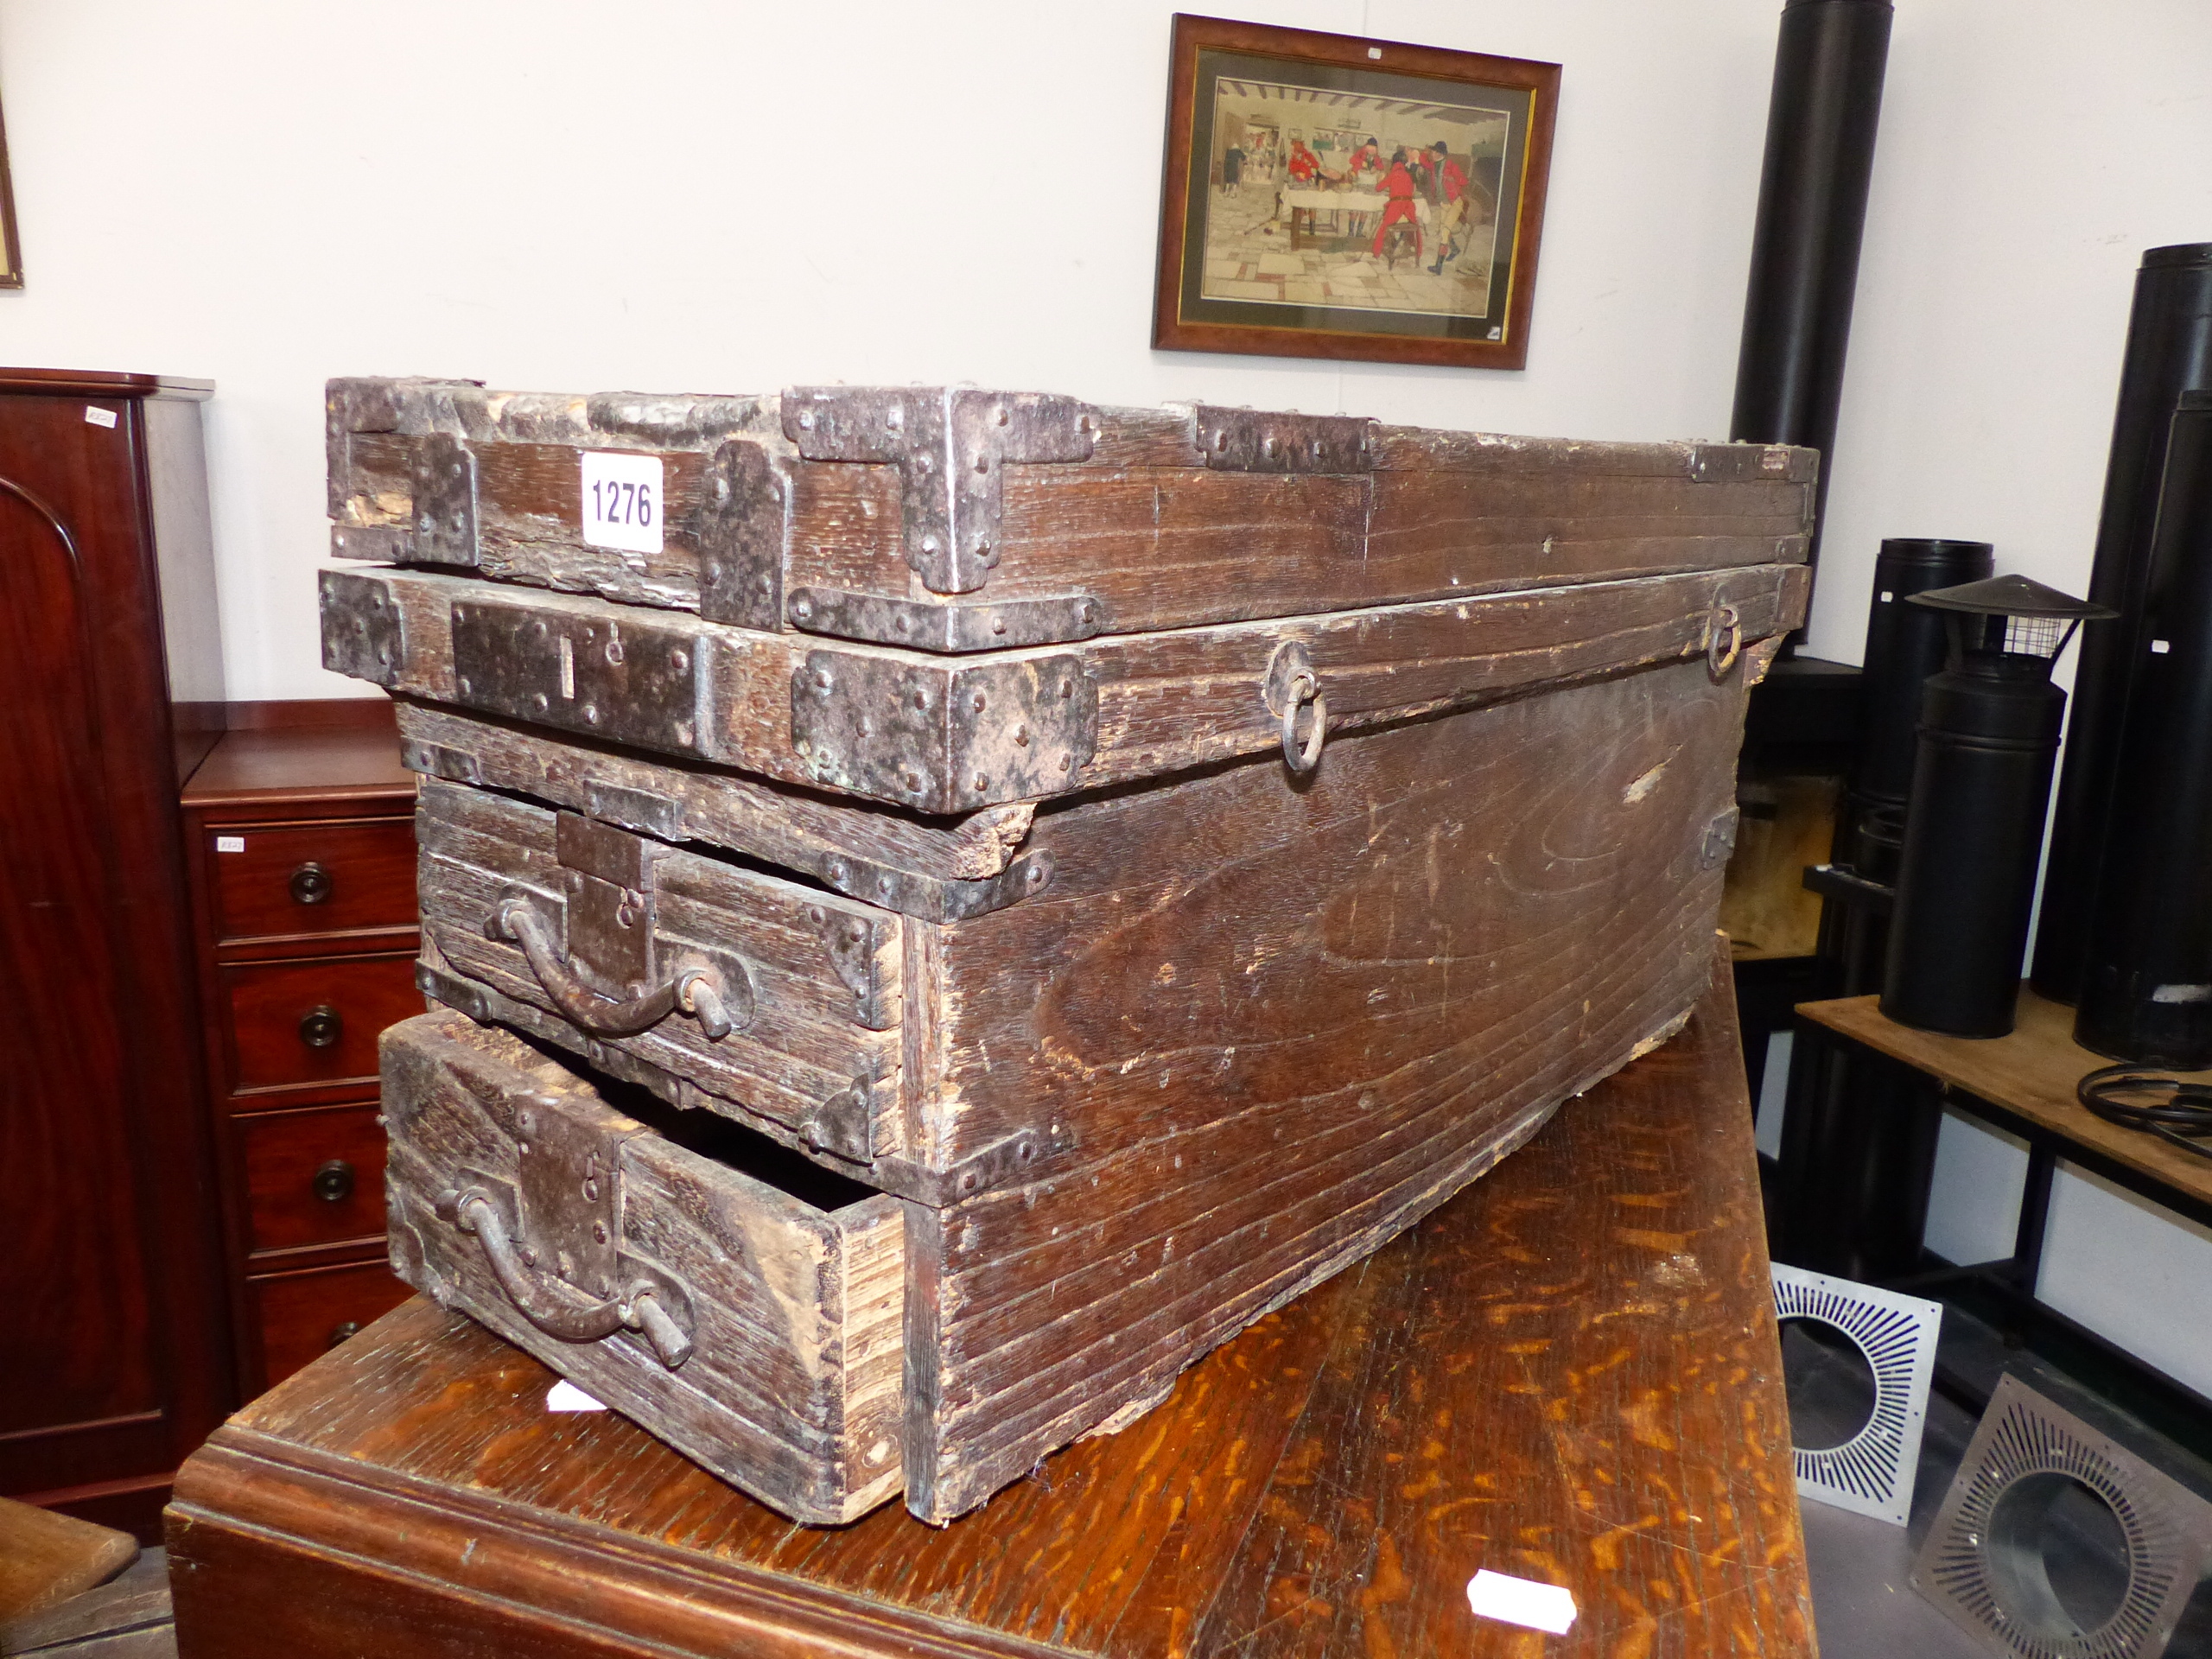 AN UNUSUAL FAR EASTERN IRON MOUNTED TRAVELLING CHEST.